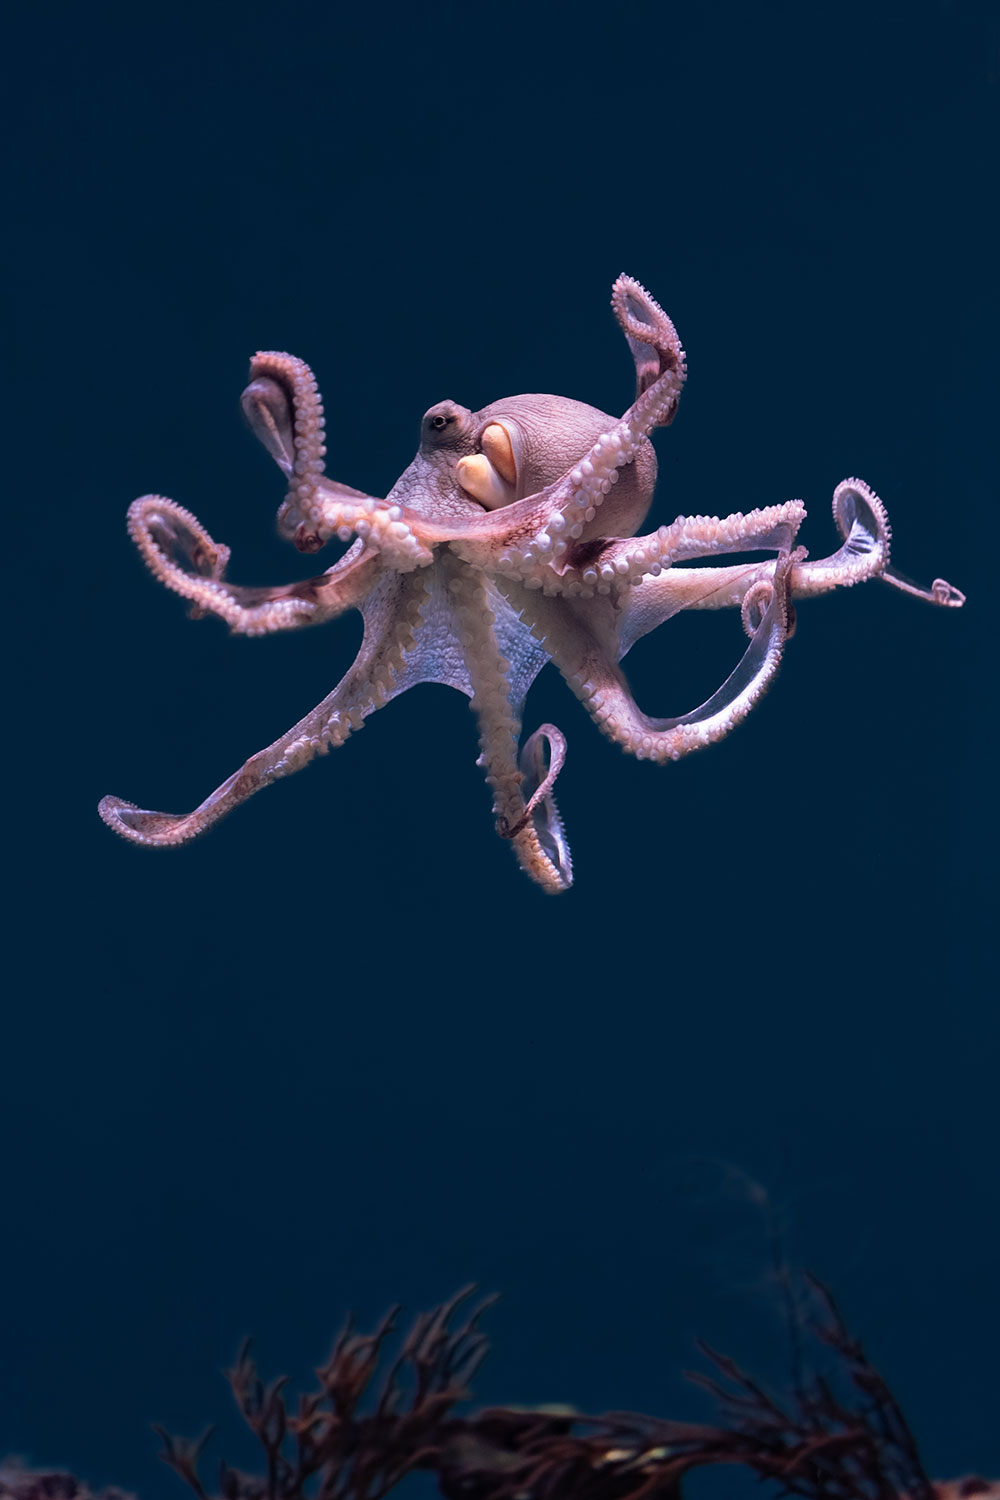 Day octopus gently floats down in exhibit